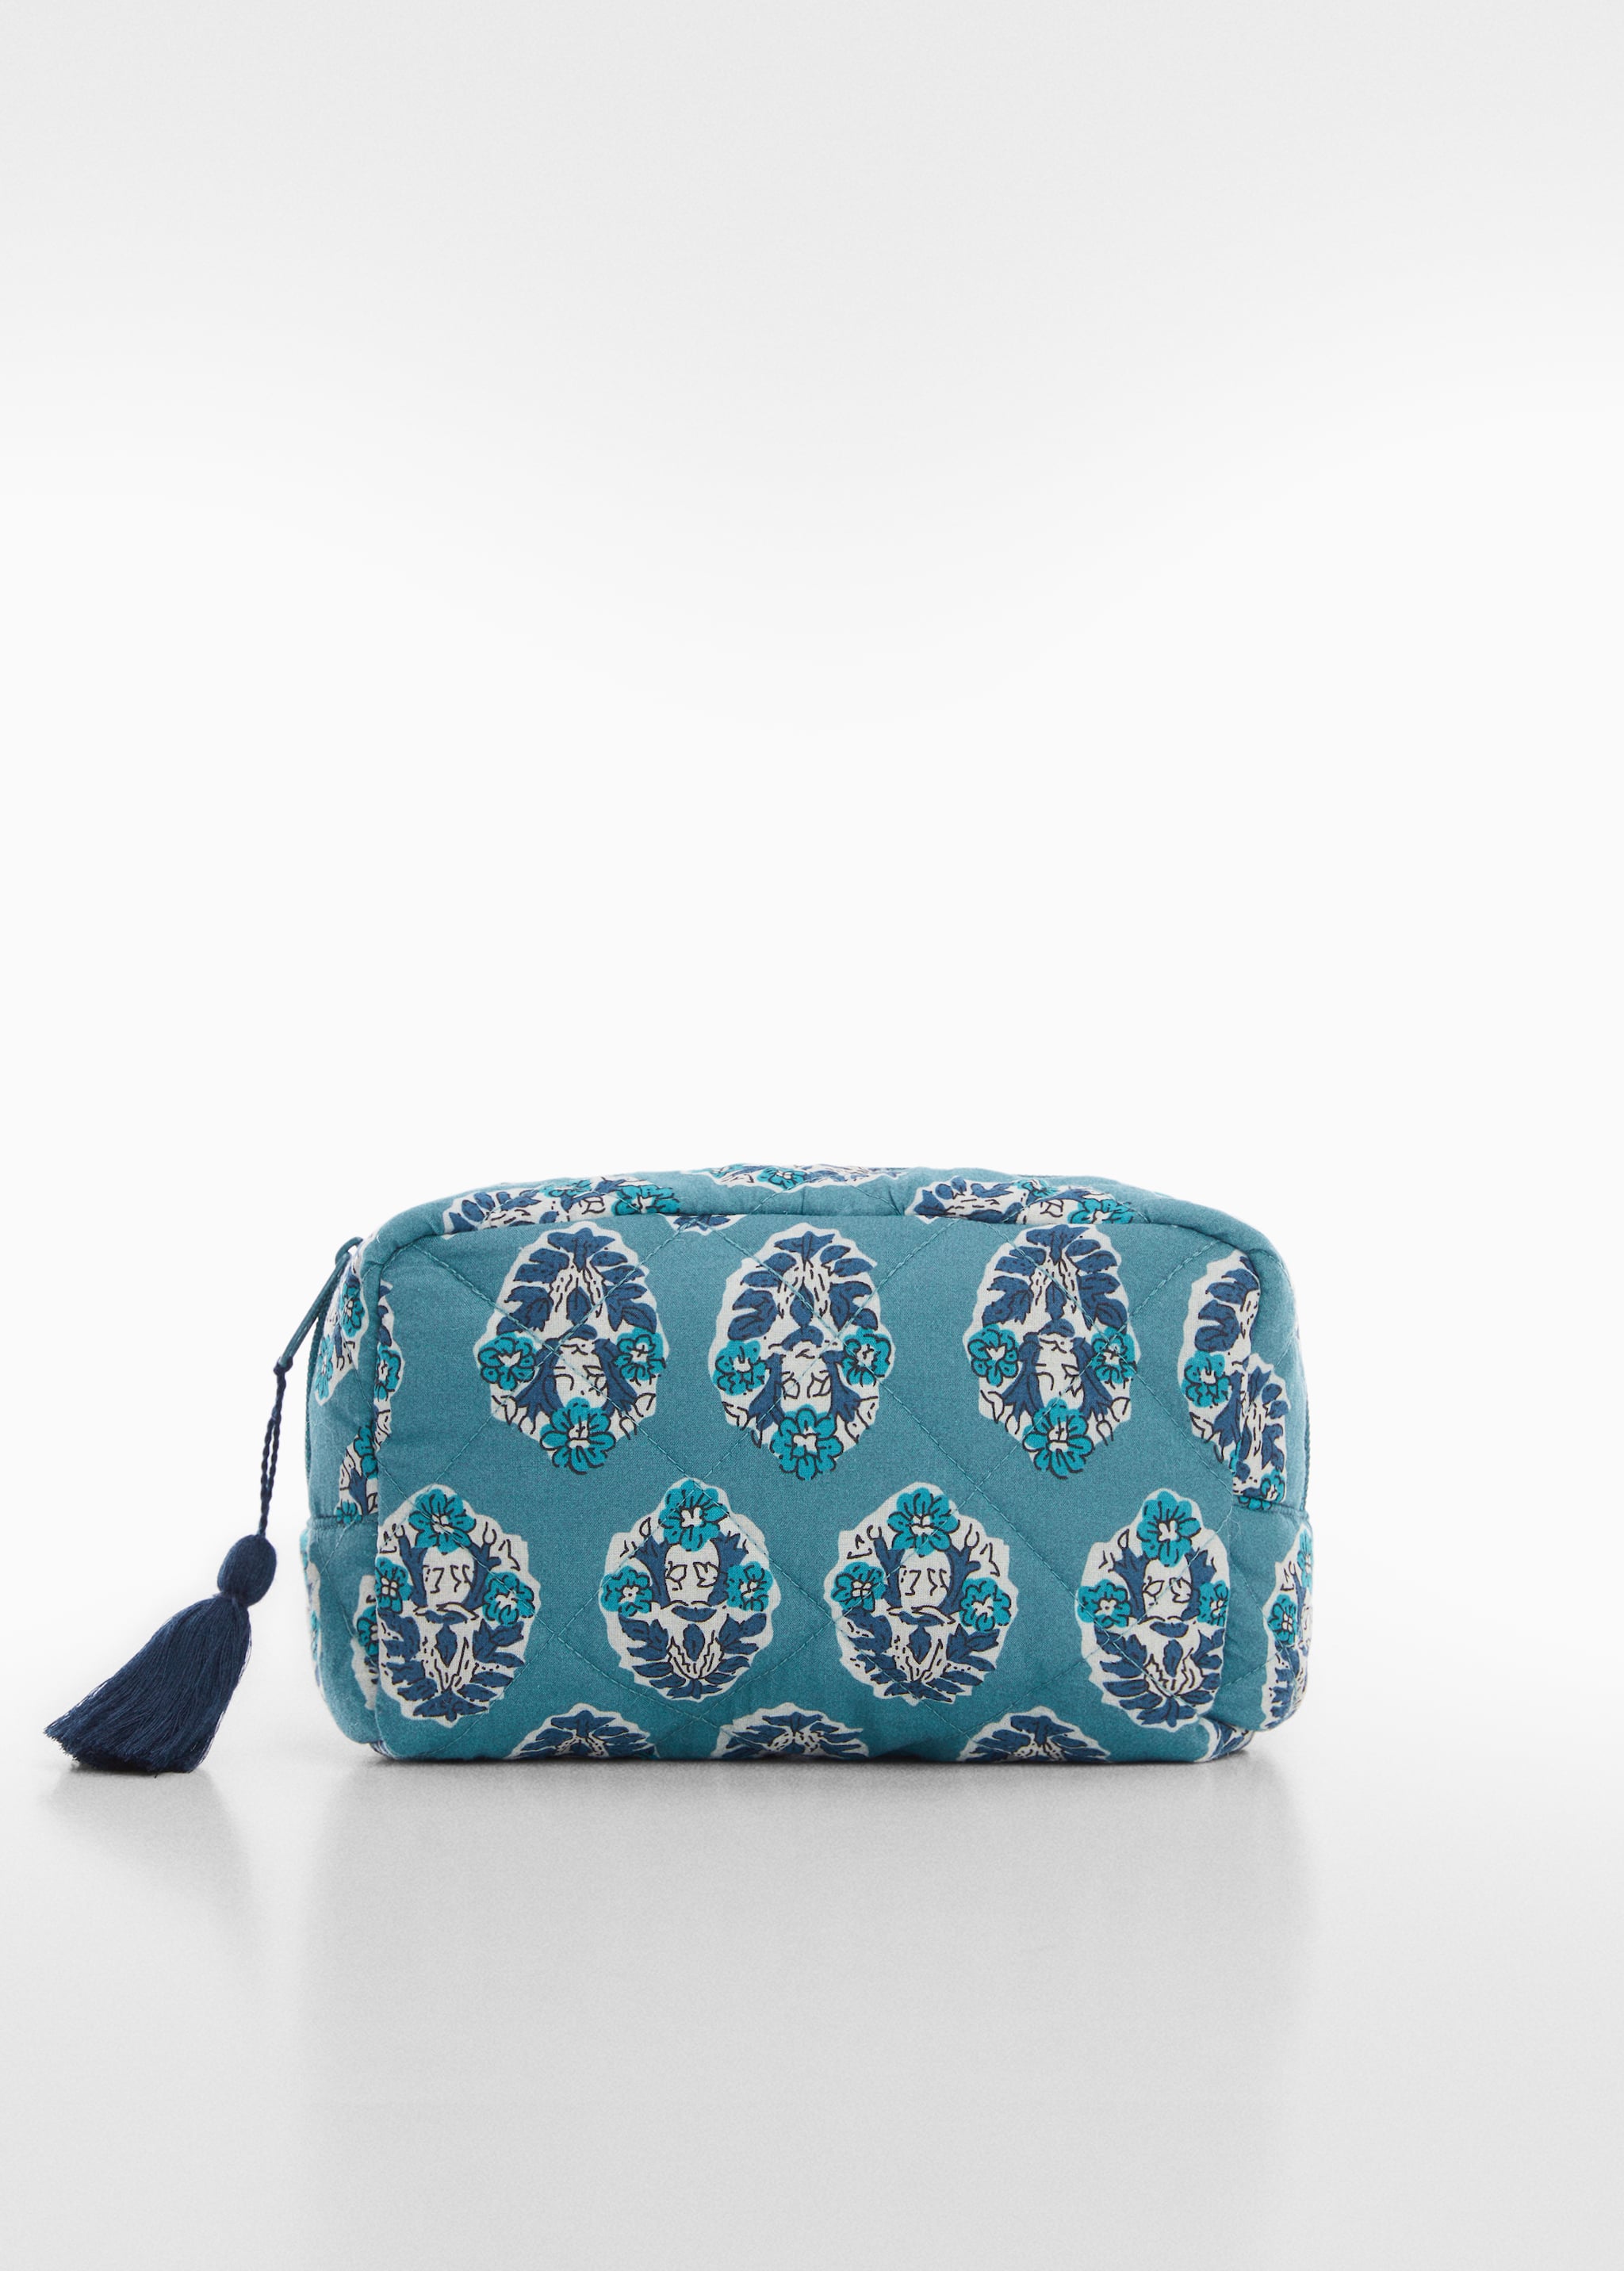 Printed cosmetic bag - Article without model